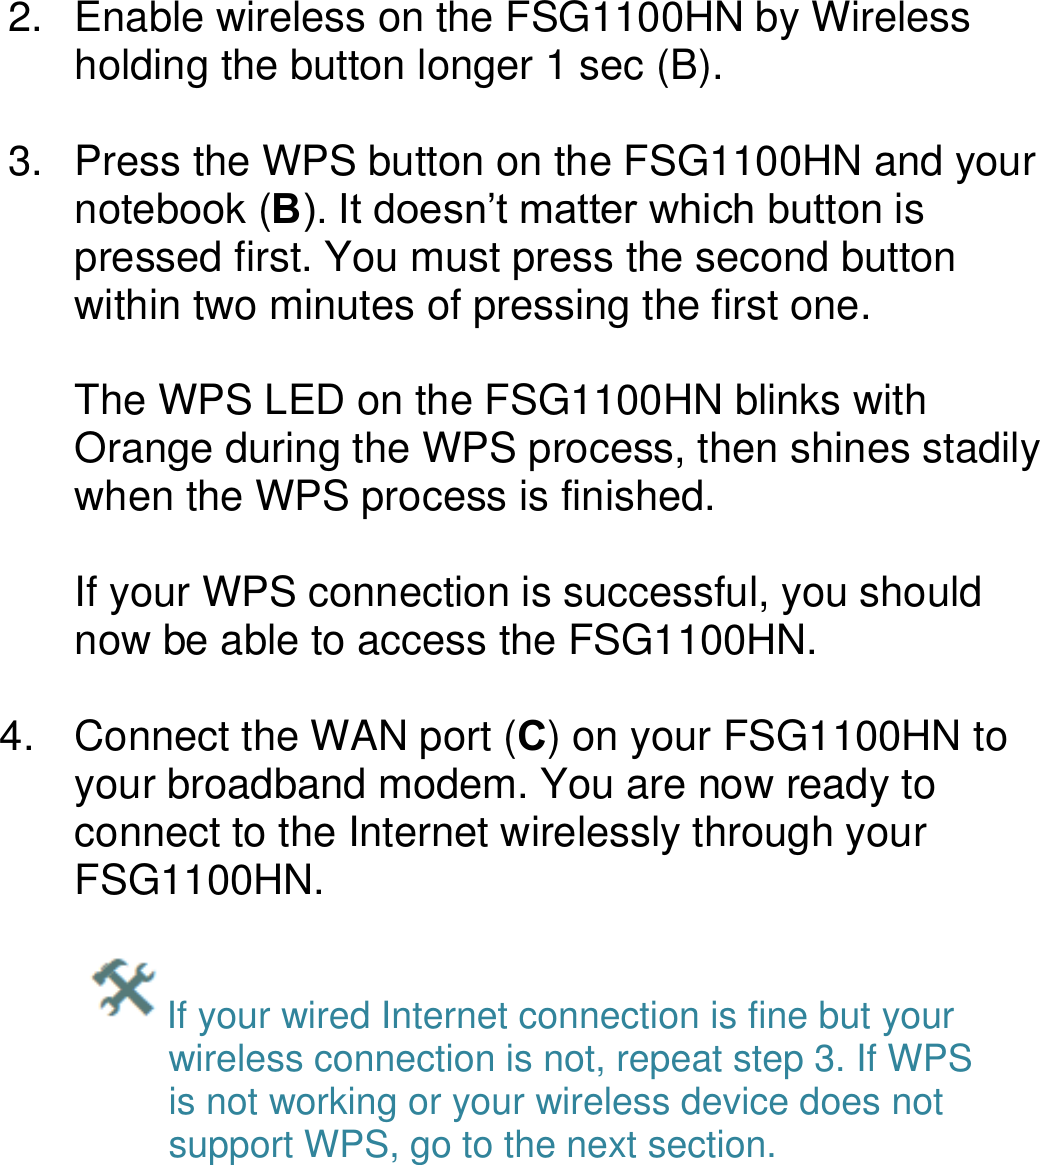   2.  Enable wireless on the FSG1100HN by Wireless holding the button longer 1 sec (B).  3.  Press the WPS button on the FSG1100HN and your notebook (B). It doesn’t matter which button is pressed first. You must press the second button within two minutes of pressing the first one.   The WPS LED on the FSG1100HN blinks with Orange during the WPS process, then shines stadily when the WPS process is finished.  If your WPS connection is successful, you should now be able to access the FSG1100HN.  4.  Connect the WAN port (C) on your FSG1100HN to your broadband modem. You are now ready to connect to the Internet wirelessly through your FSG1100HN.  If your wired Internet connection is fine but your wireless connection is not, repeat step 3. If WPS is not working or your wireless device does not support WPS, go to the next section.    